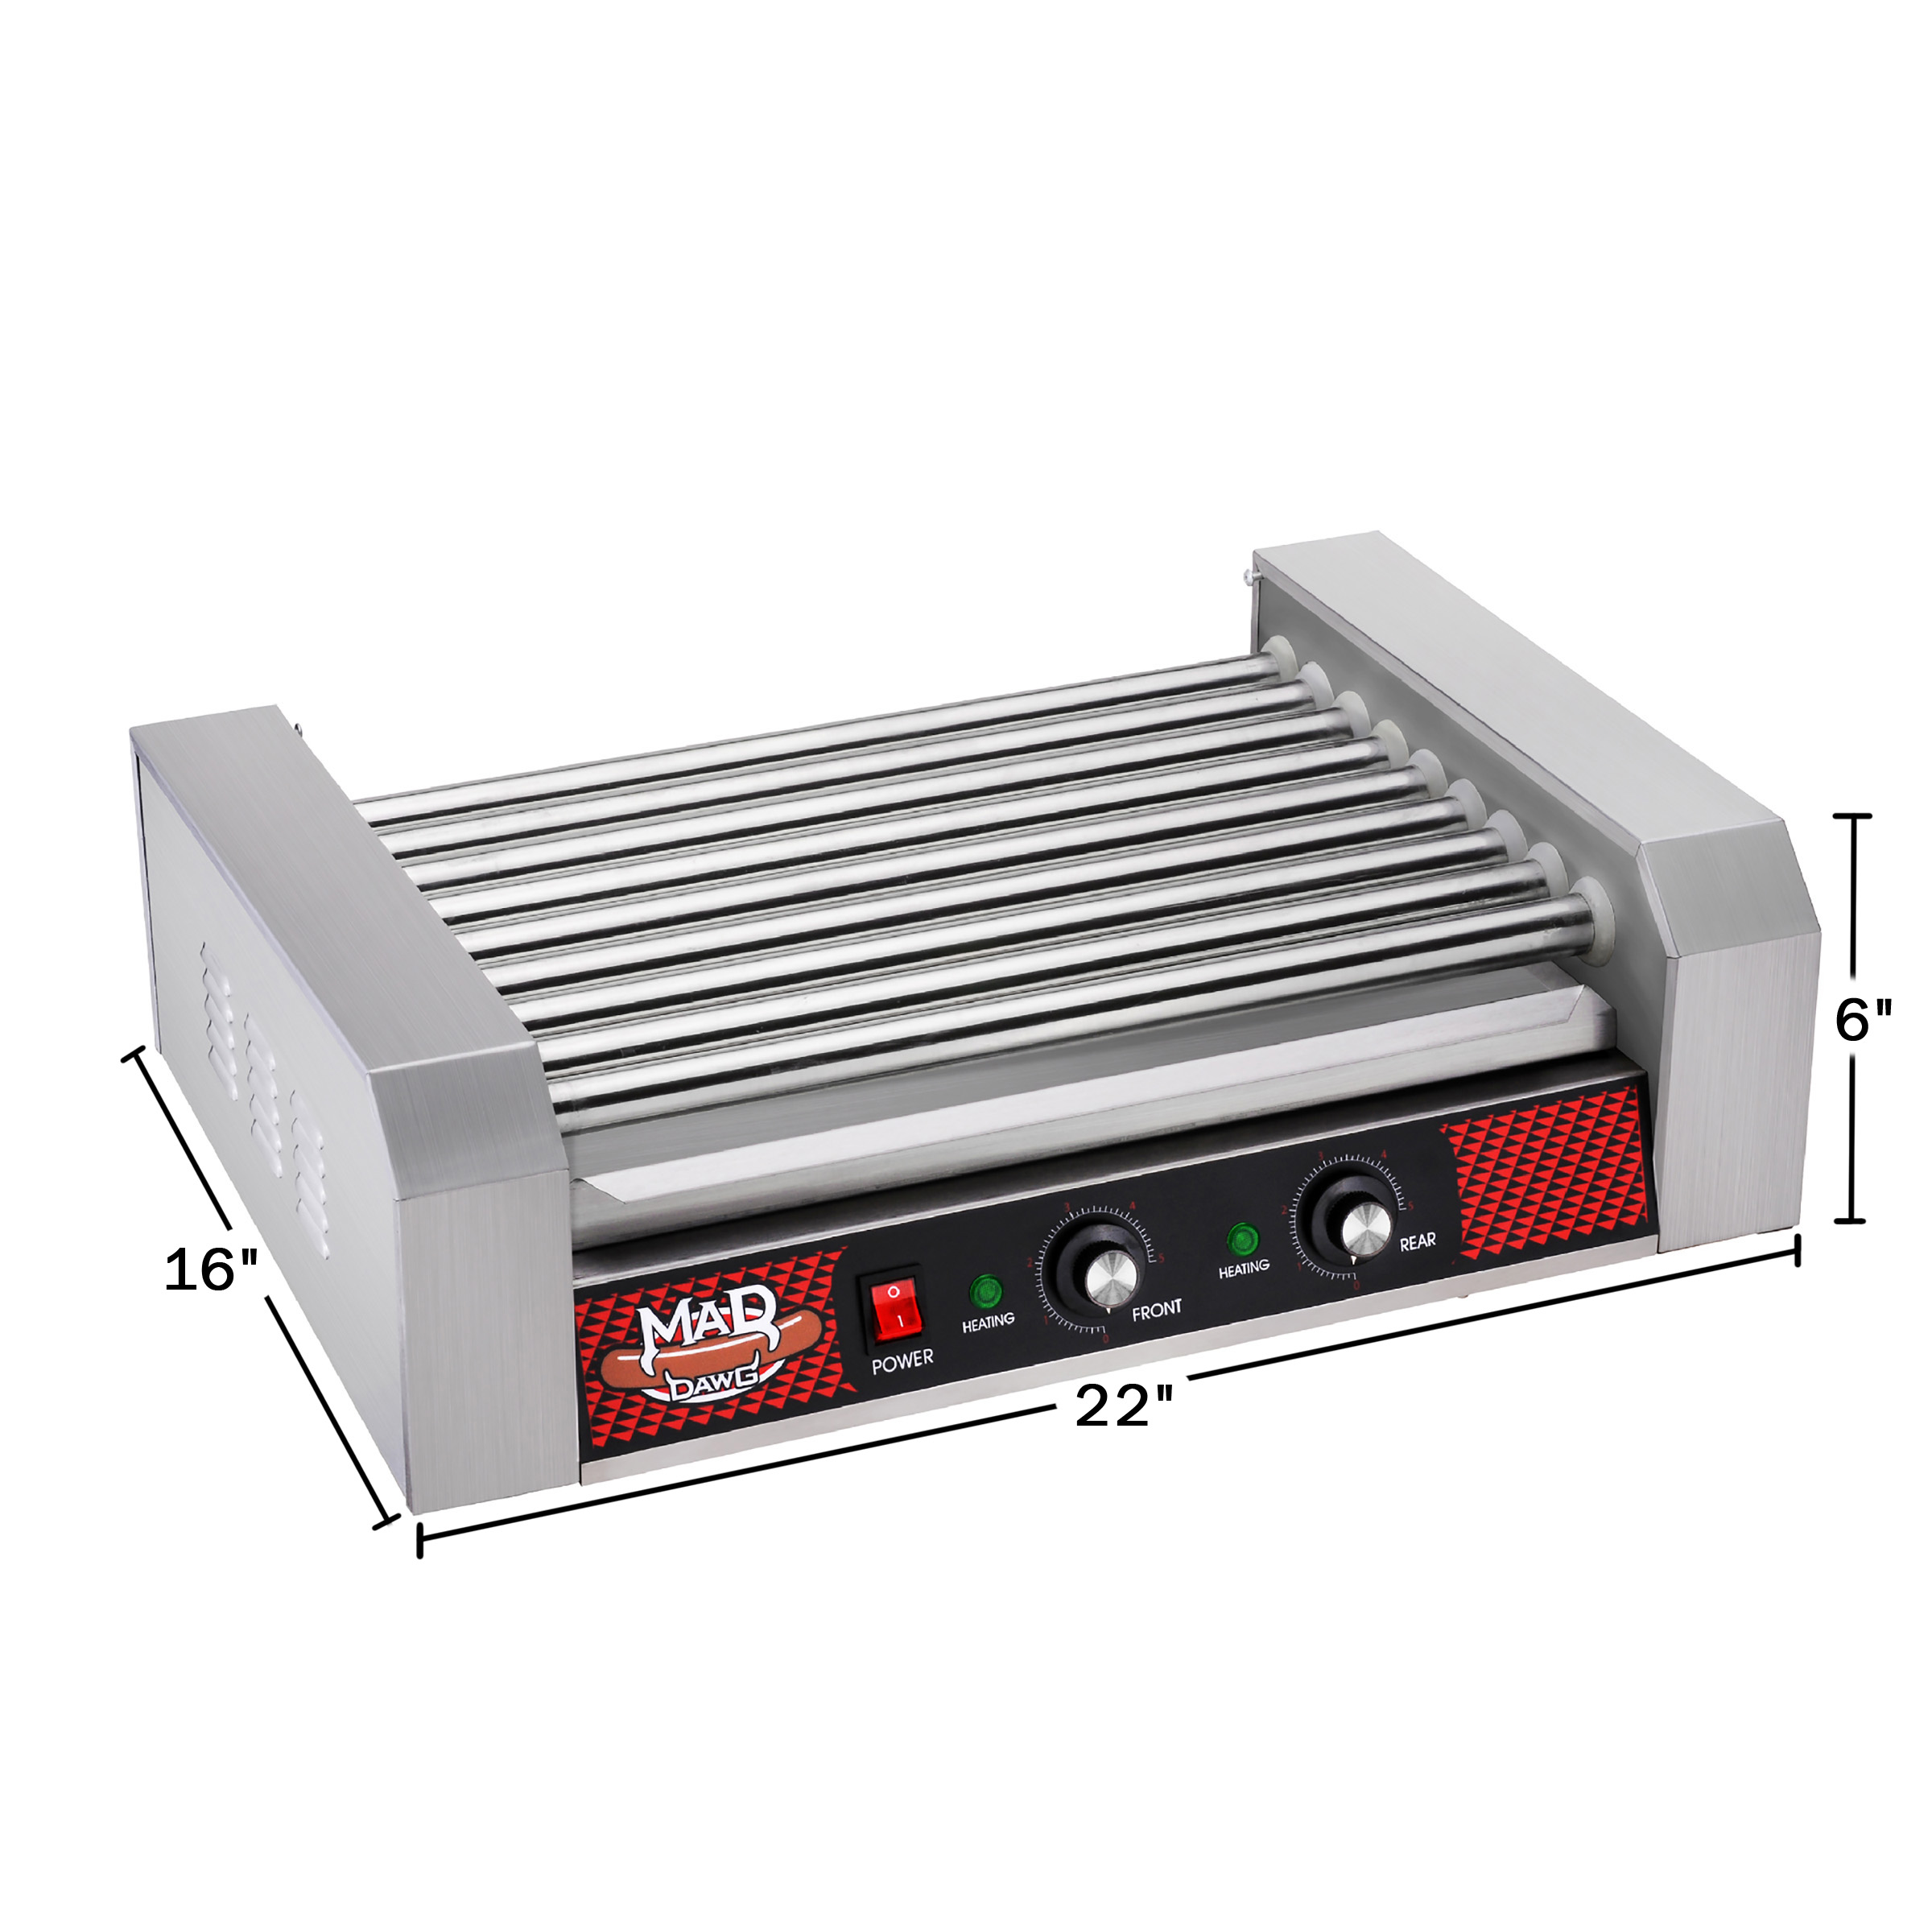 24 Hot Dog Roller Machine- 9 Rollers, Hotdog or Sausage Grill -Electric Countertop Cooker, Drip Tray & Dual Zones by Great Northern Popcorn - image 2 of 5